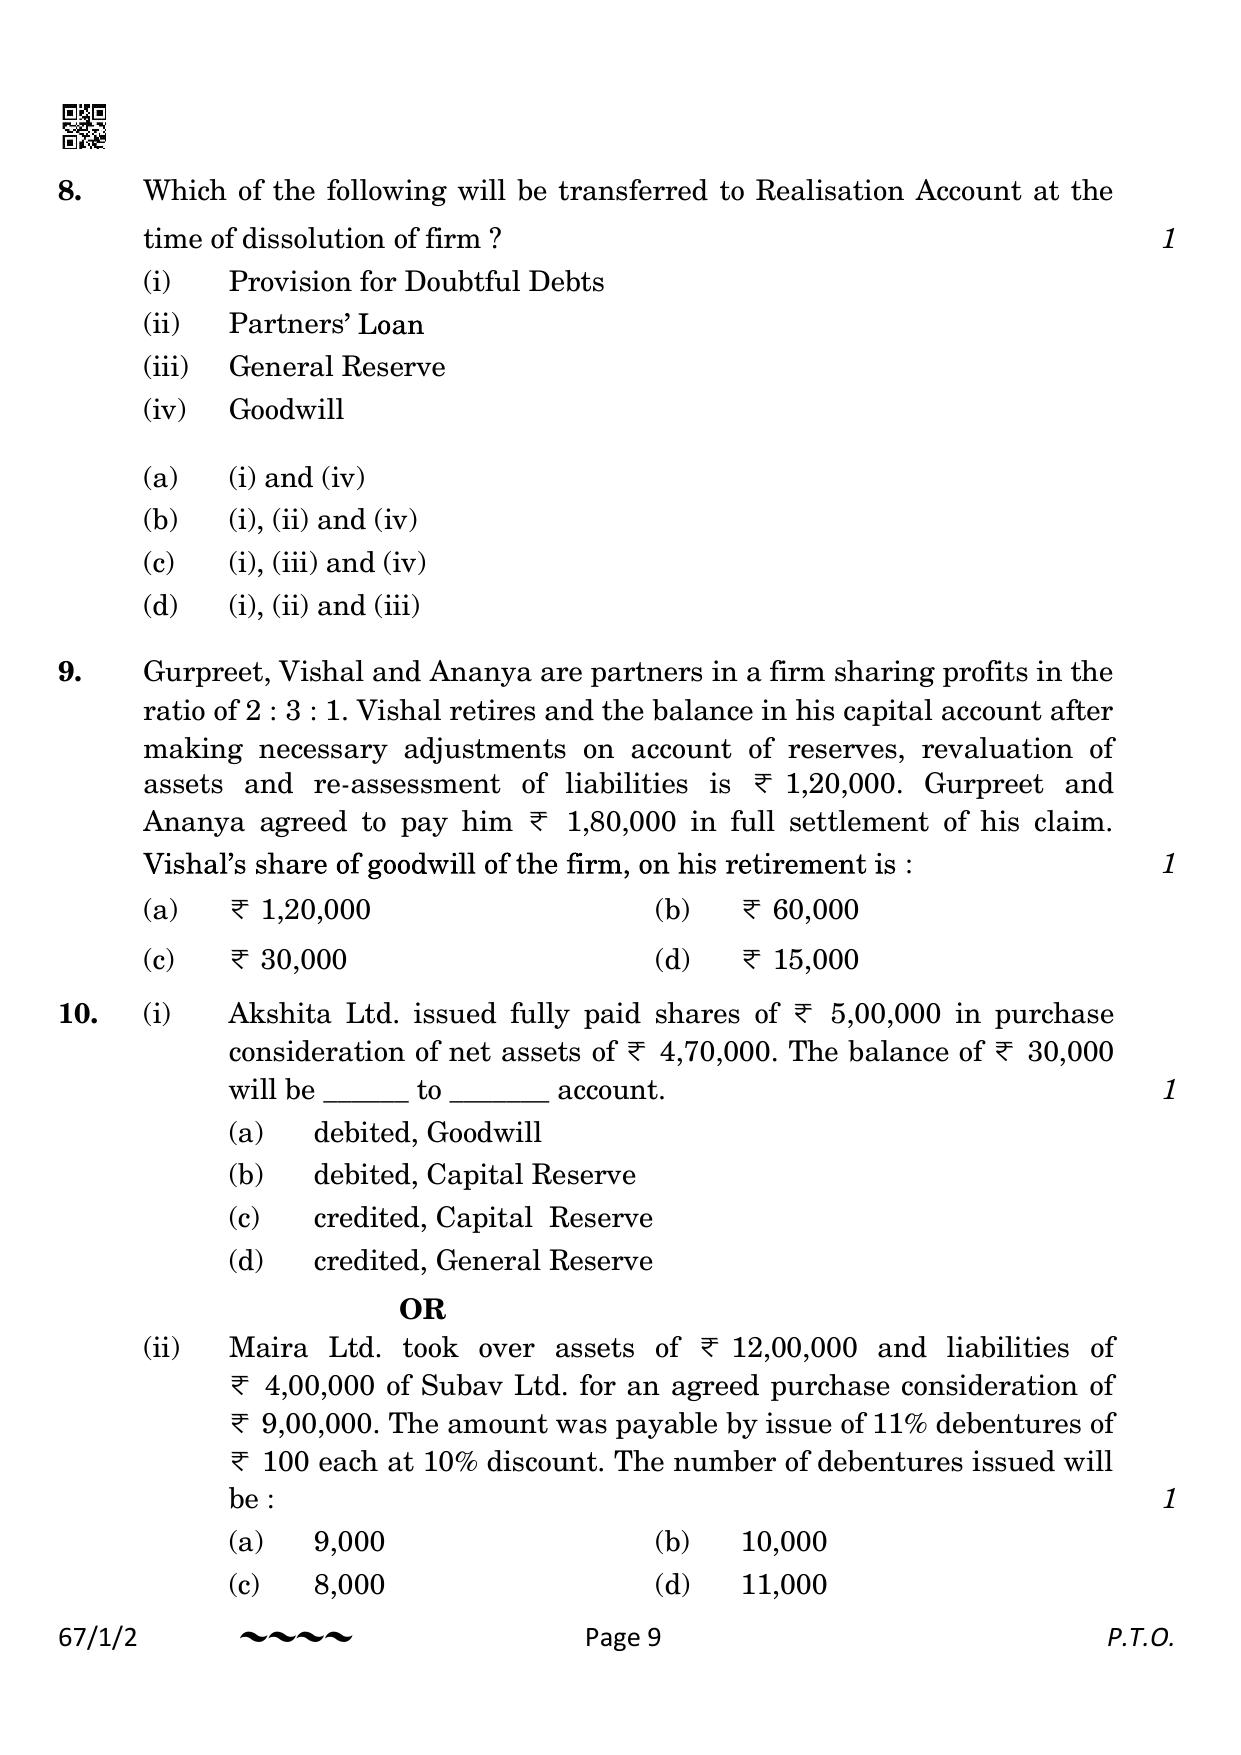 CBSE Class 12 67-1-2 Accountancy 2023 Question Paper - Page 9